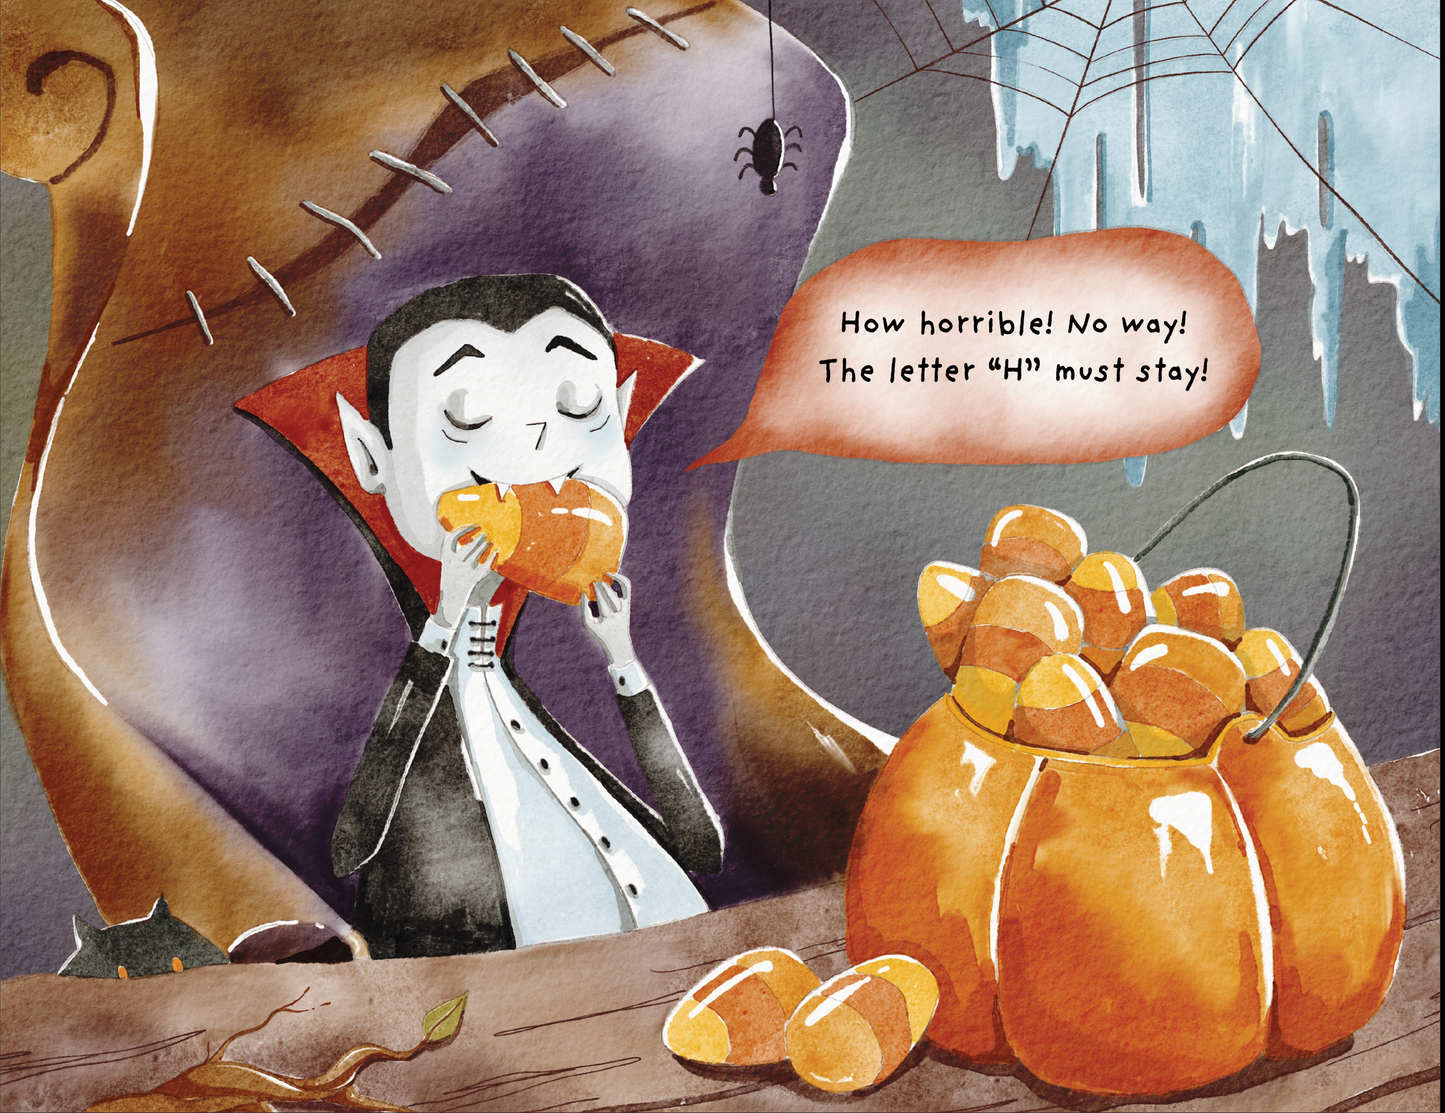 Adorable children's picture book, "What? No more Halloween?" by K.M.Messina. Illustrated by Nataliia Pavliuk.